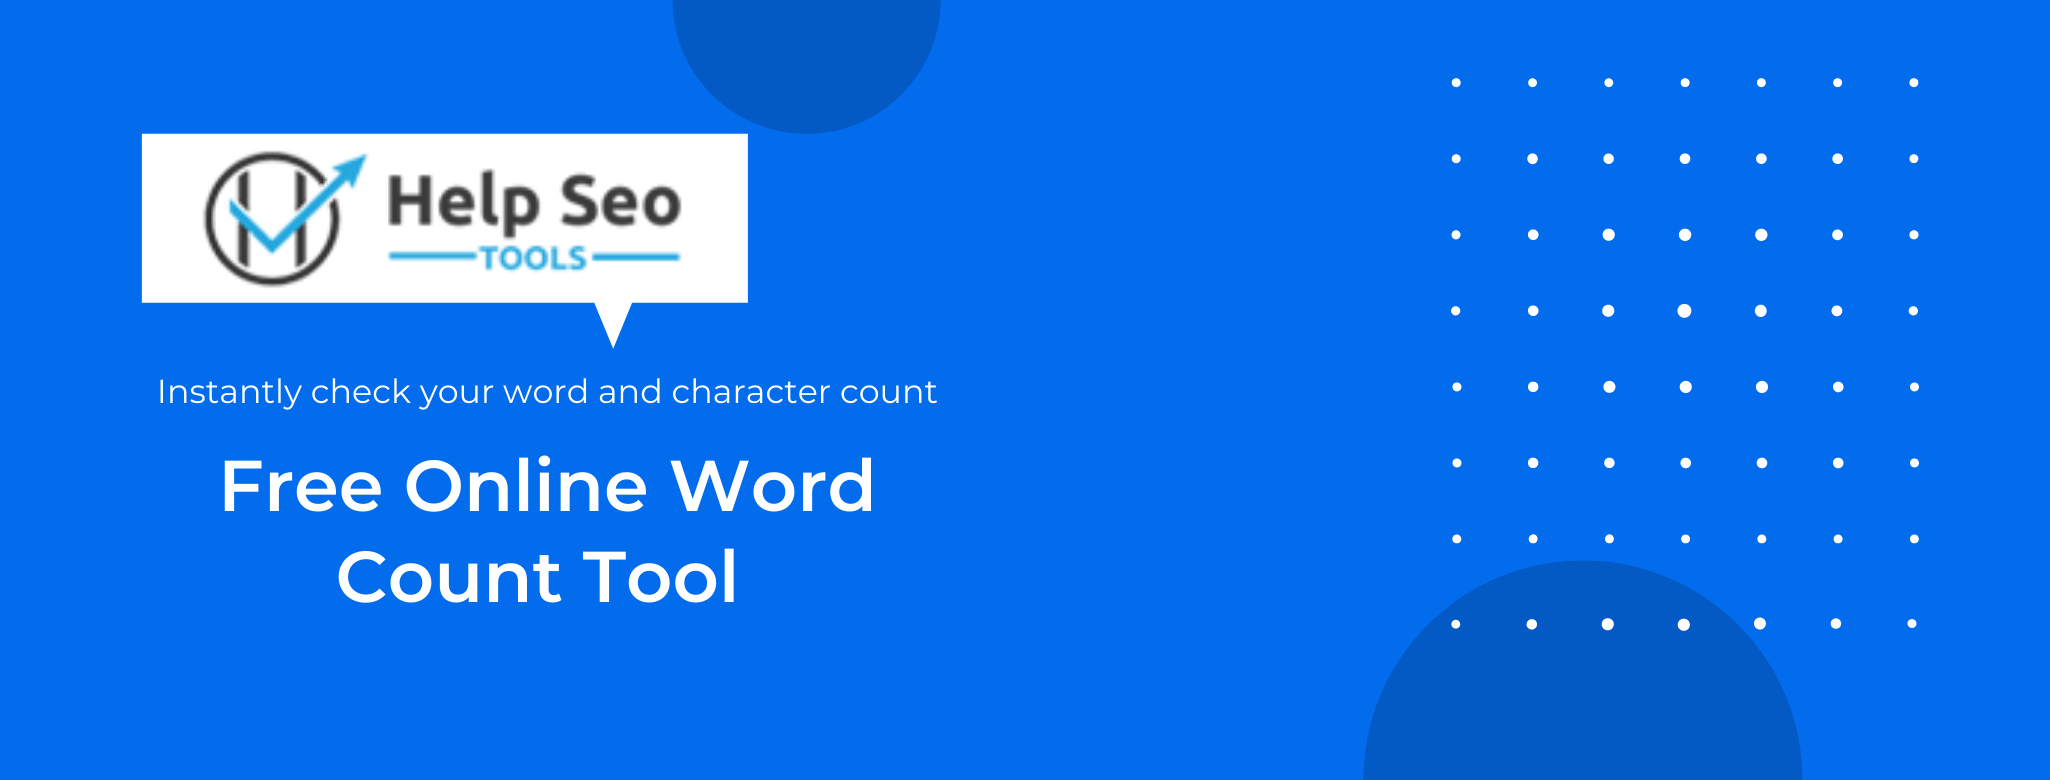 Free Online Word counter tools